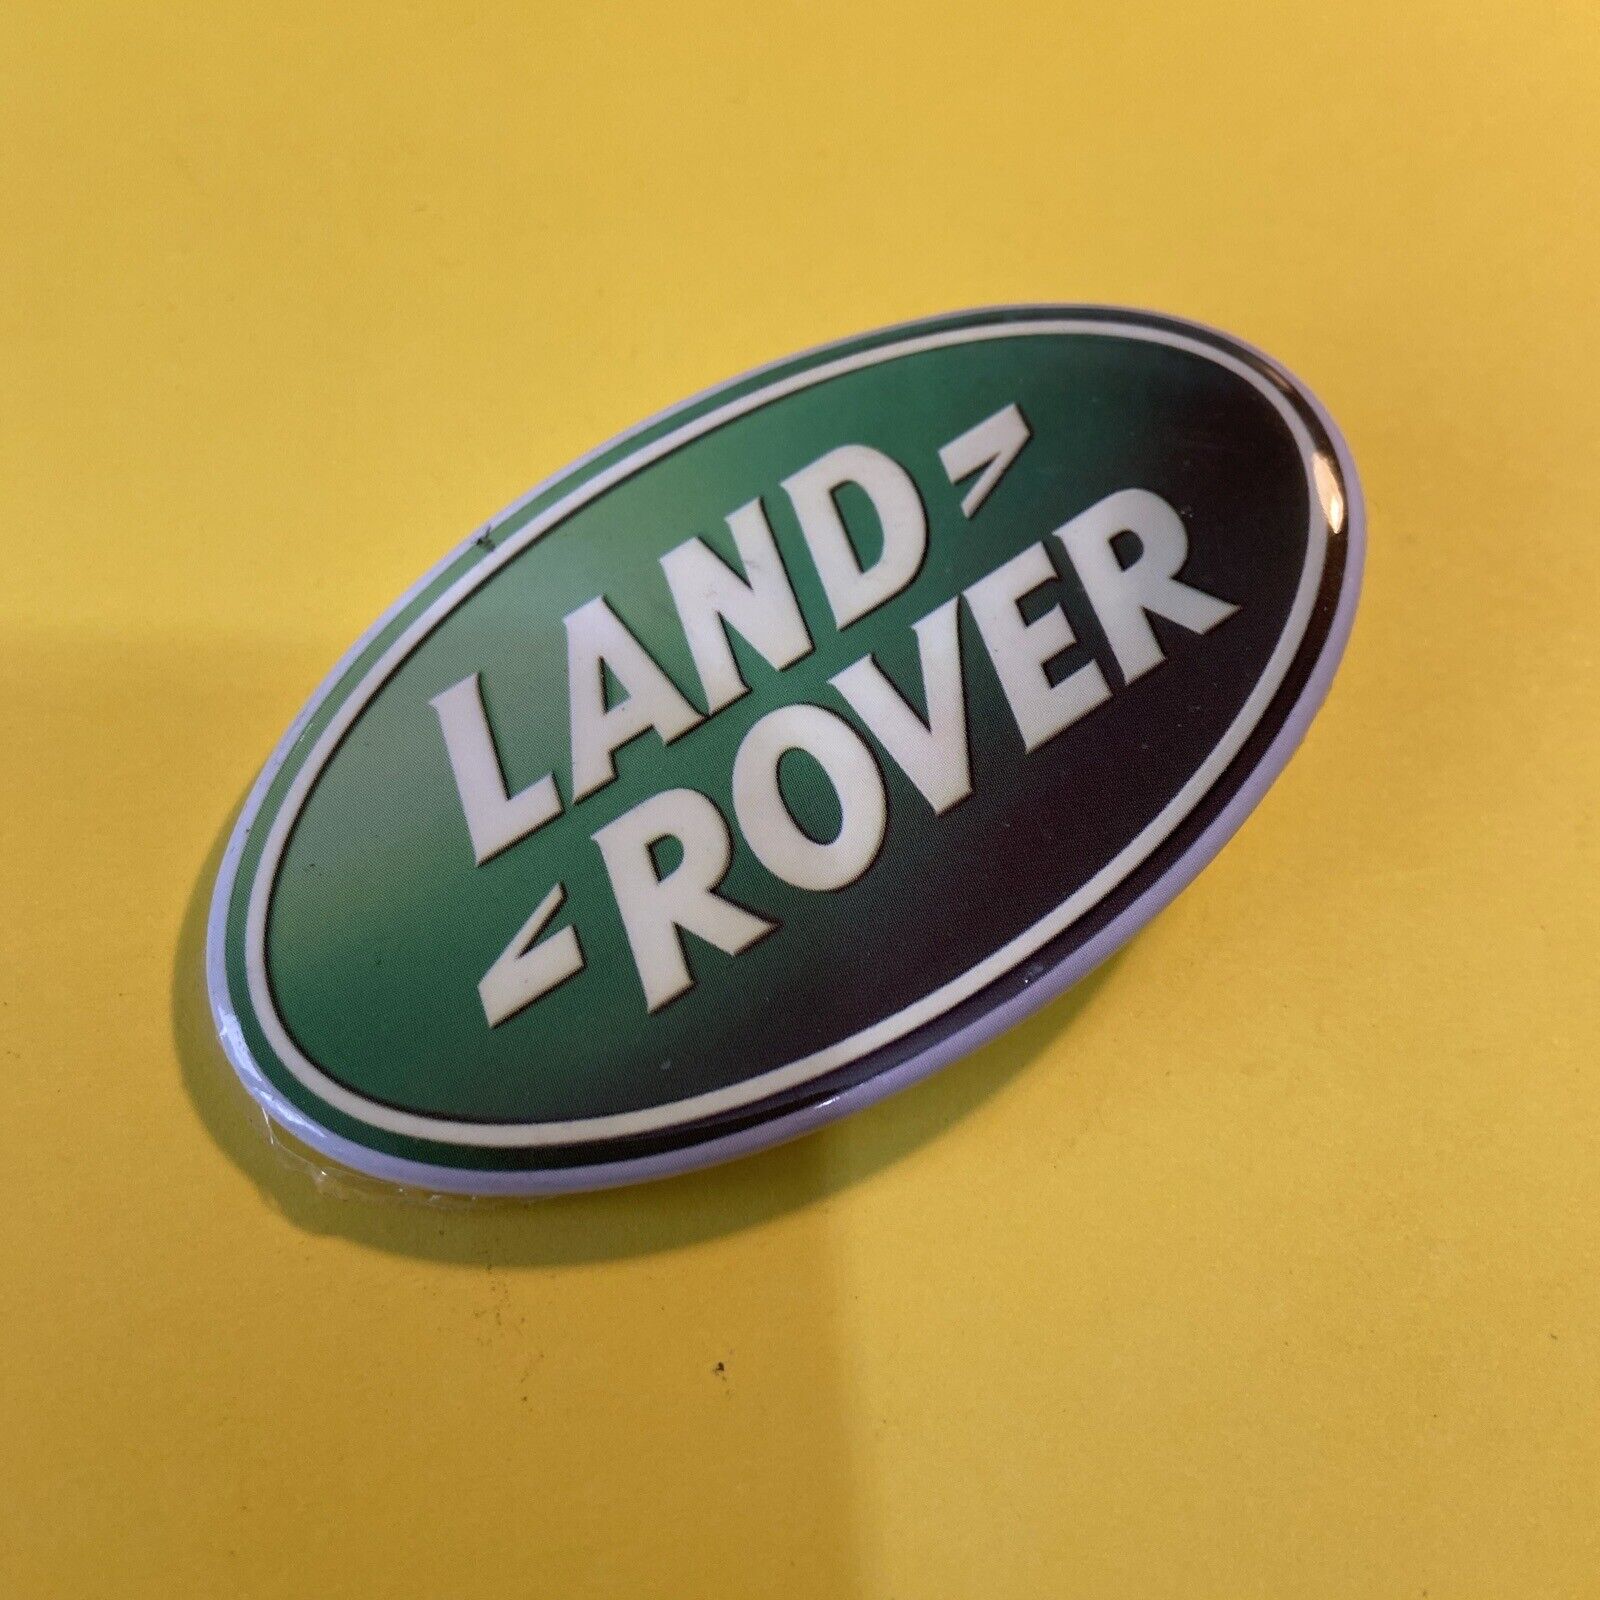 2 X GENUINE LAND ROVER SHOW PIN BADGE STC 50583 70MM X43MM